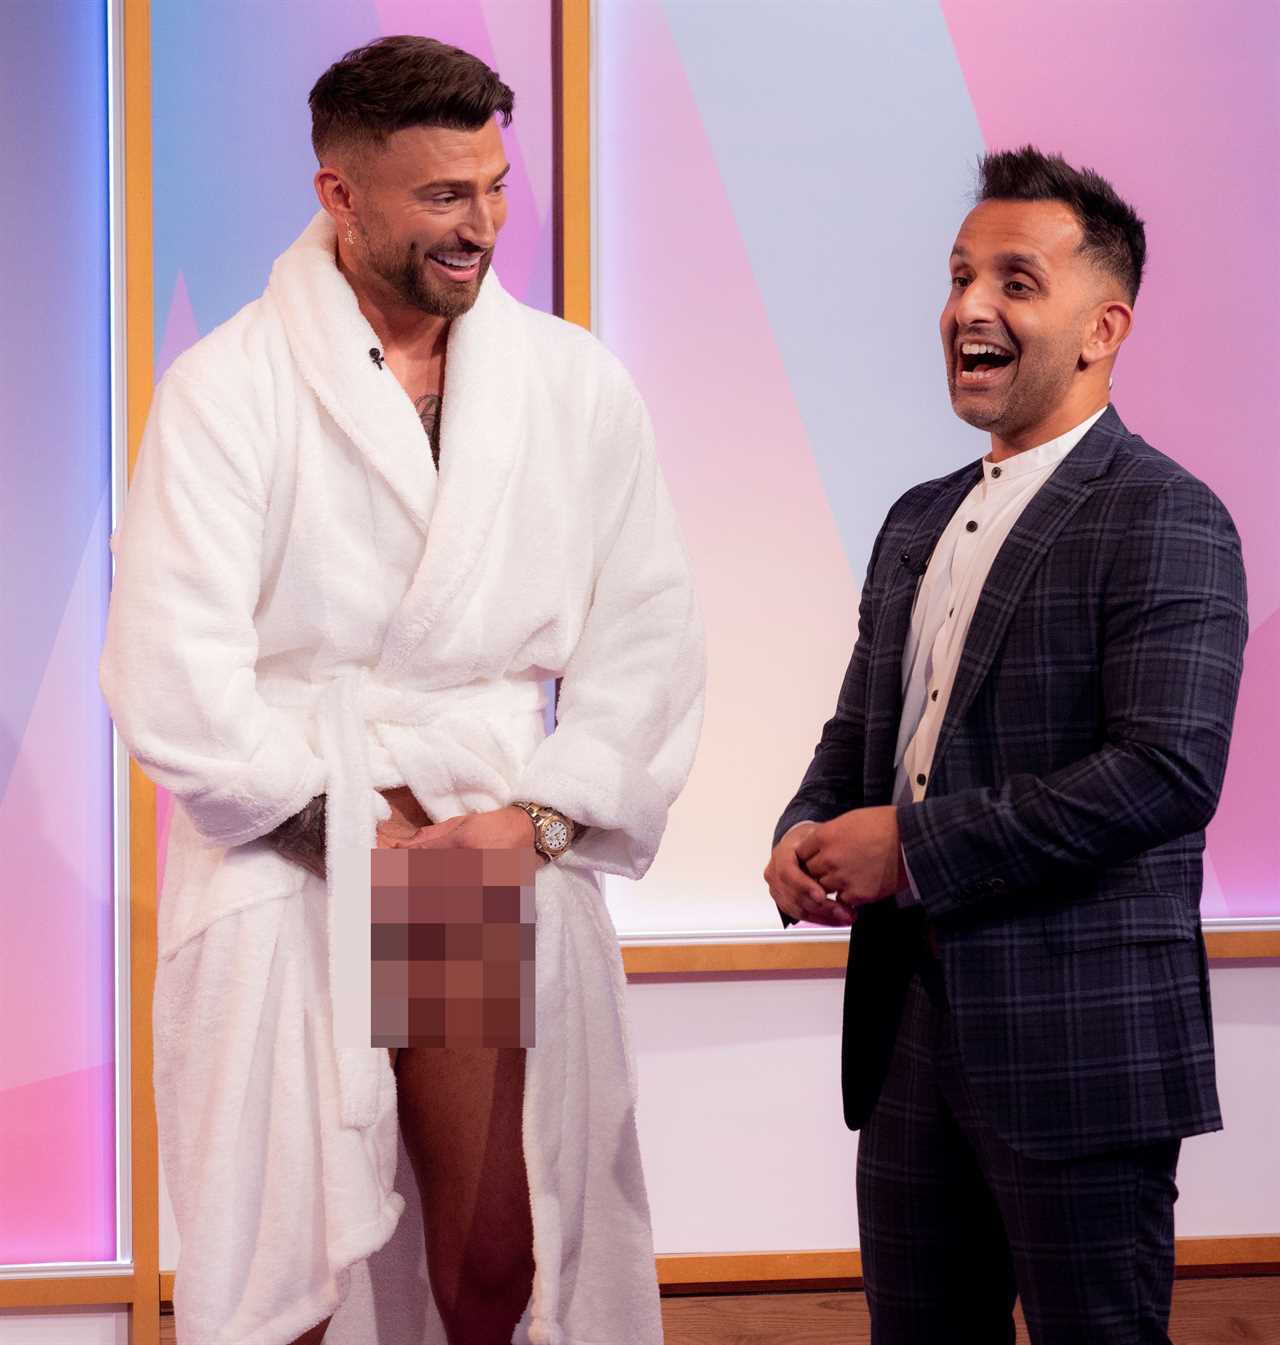 Loose Men viewers all say the same thing as Jake Quickenden has his testicles examined on live TV